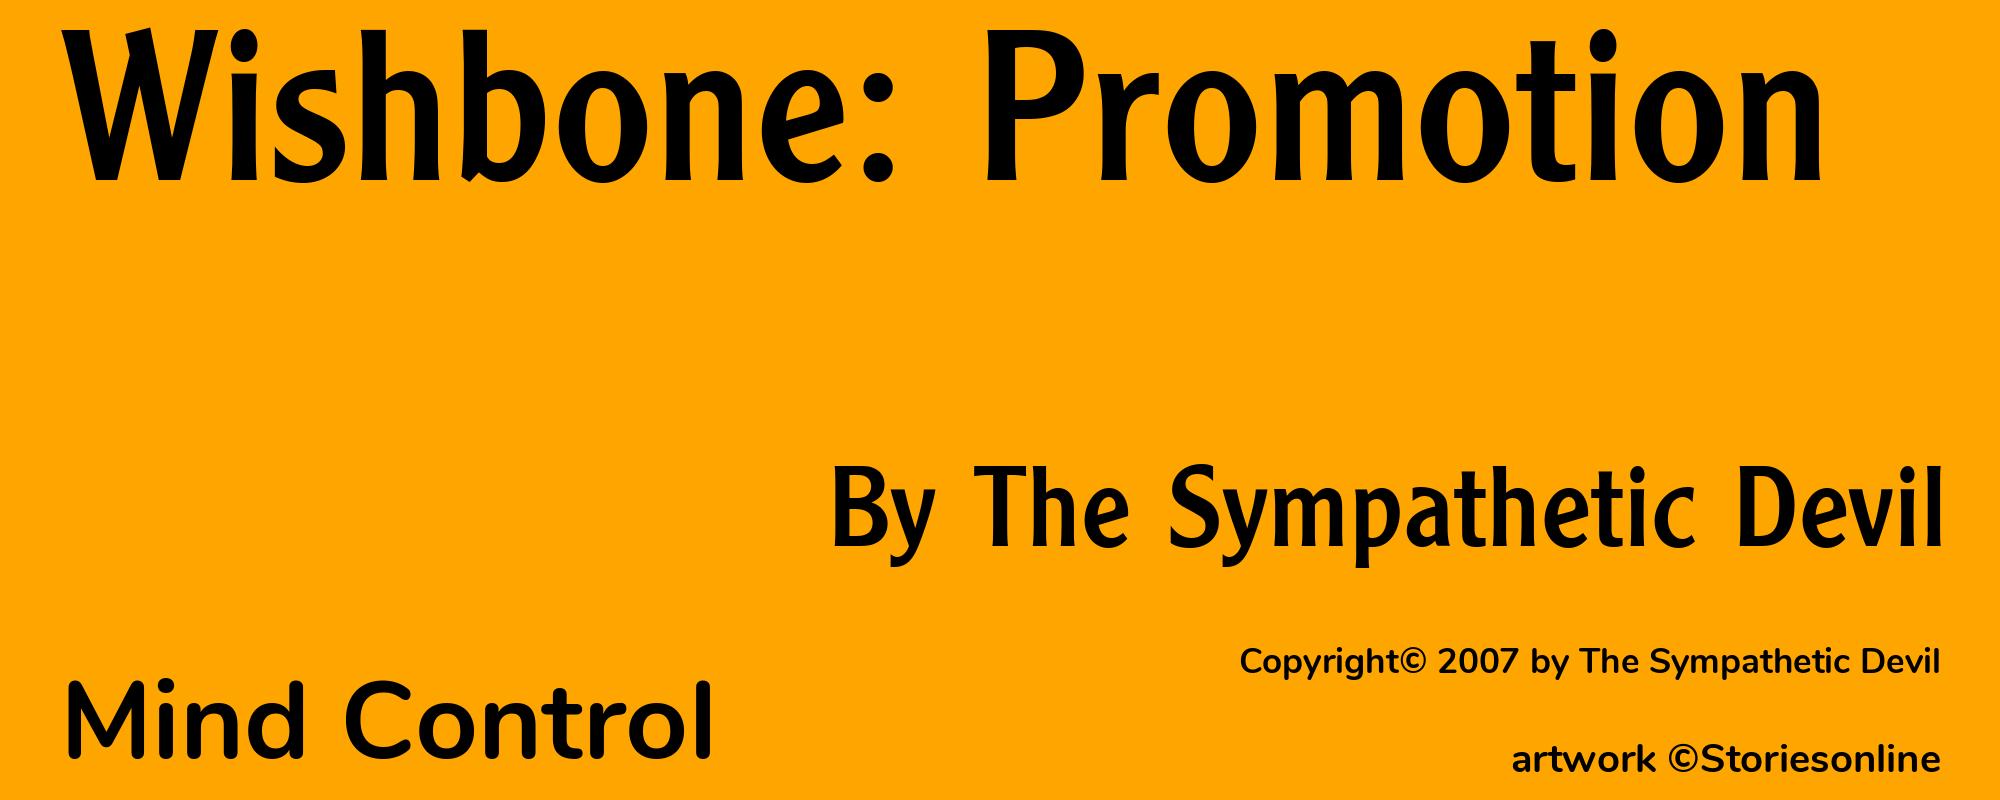 Wishbone: Promotion - Cover